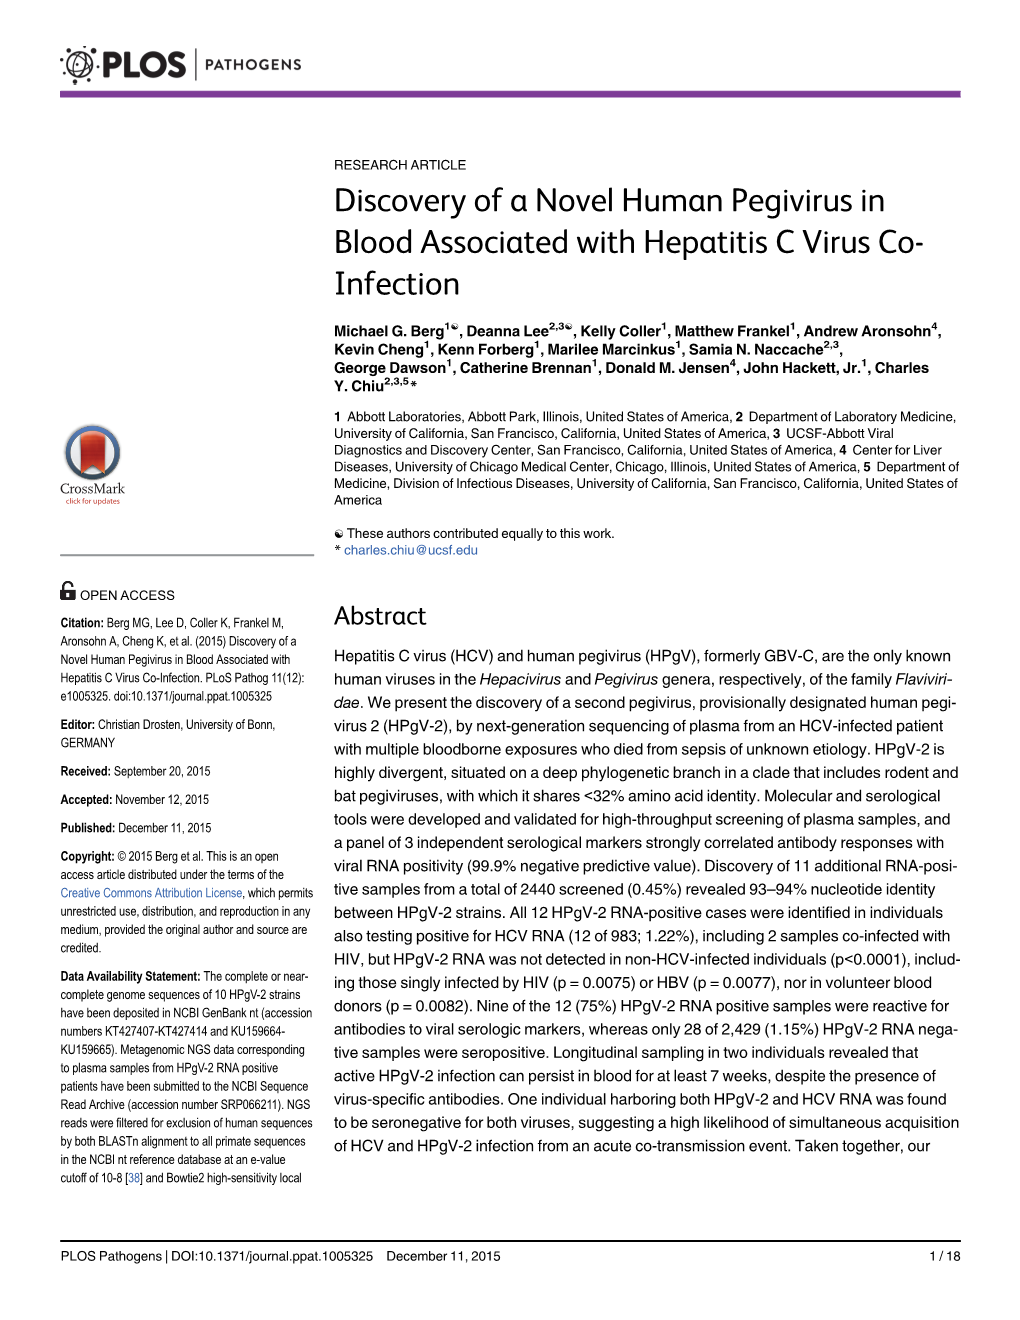 Discovery of a Novel Human Pegivirus in Blood Associated with Hepatitis C Virus Co-Infection